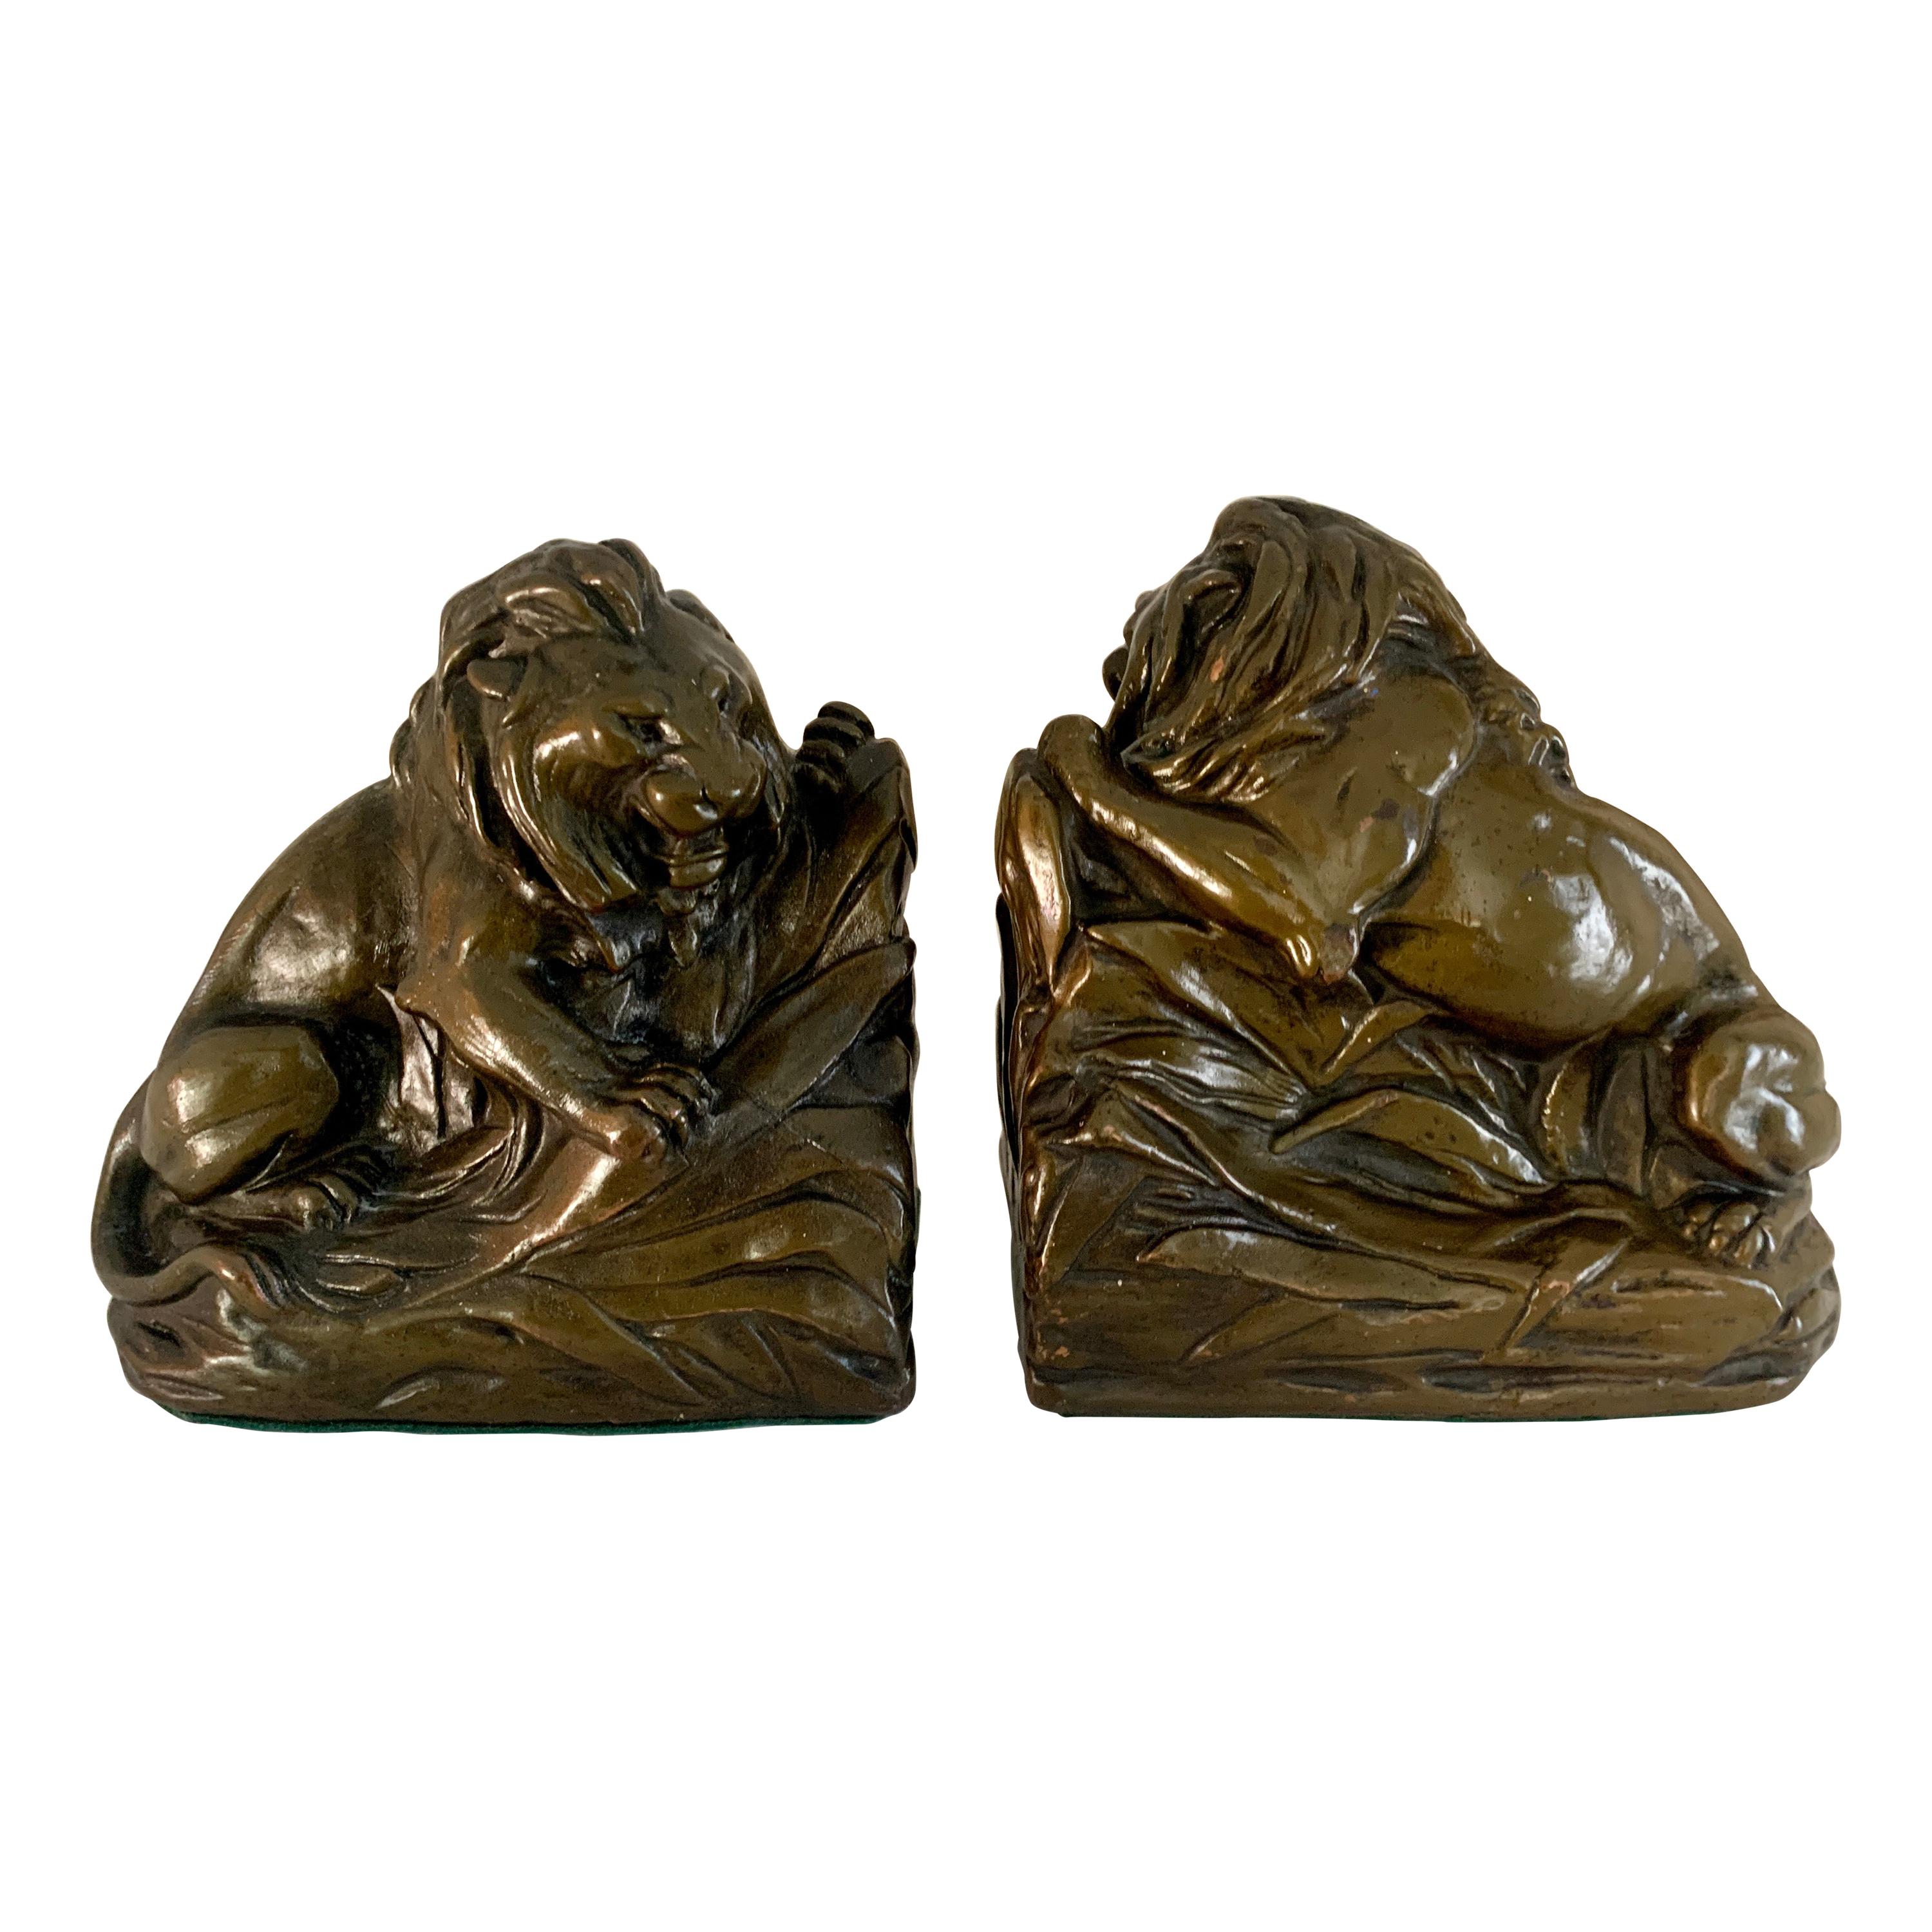 Pair of Bronze Clad Lion Bookends